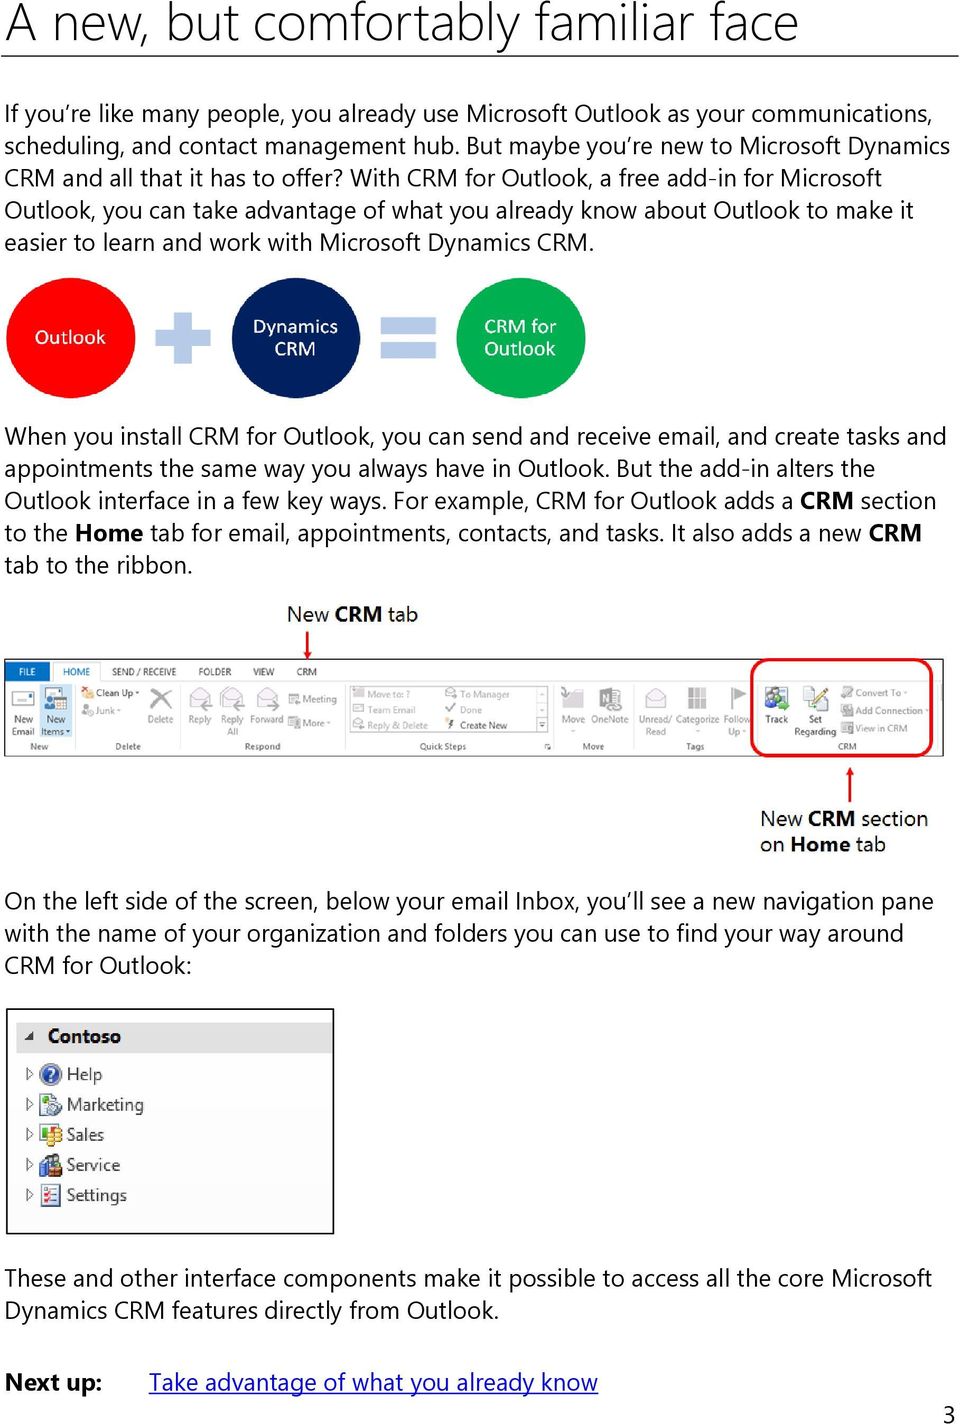 With CRM for Outlook, a free add-in for Microsoft Outlook, you can take advantage of what you already know about Outlook to make it easier to learn and work with Microsoft Dynamics CRM.